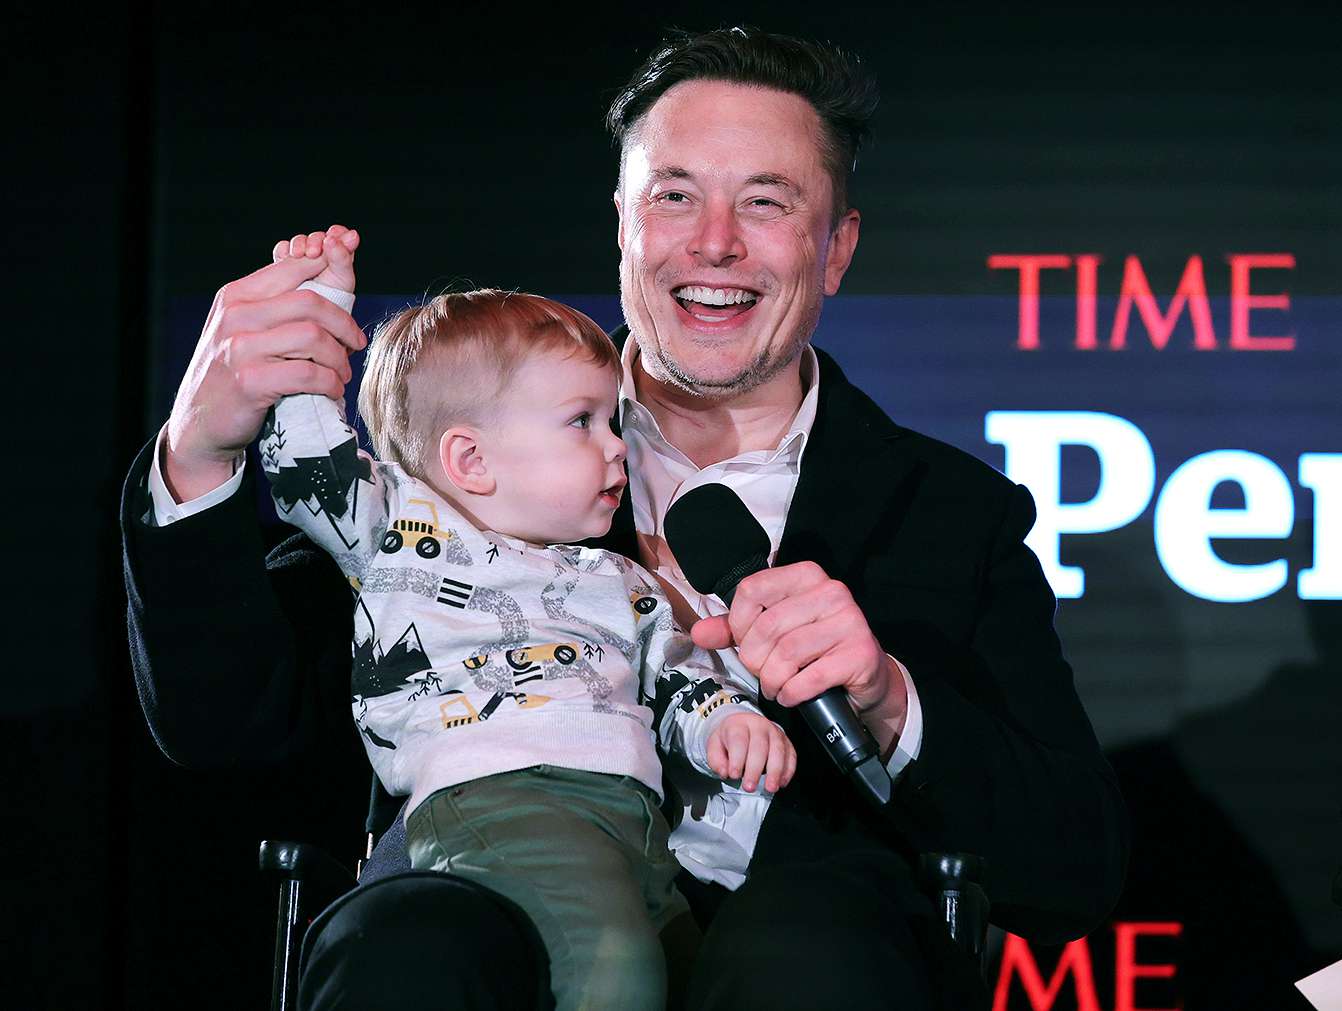 NEW YORK, NEW YORK - DECEMBER 13: Elon Musk and son X Æ A-12 on stage TIME Person of the Year on December 13, 2021 in New York City.